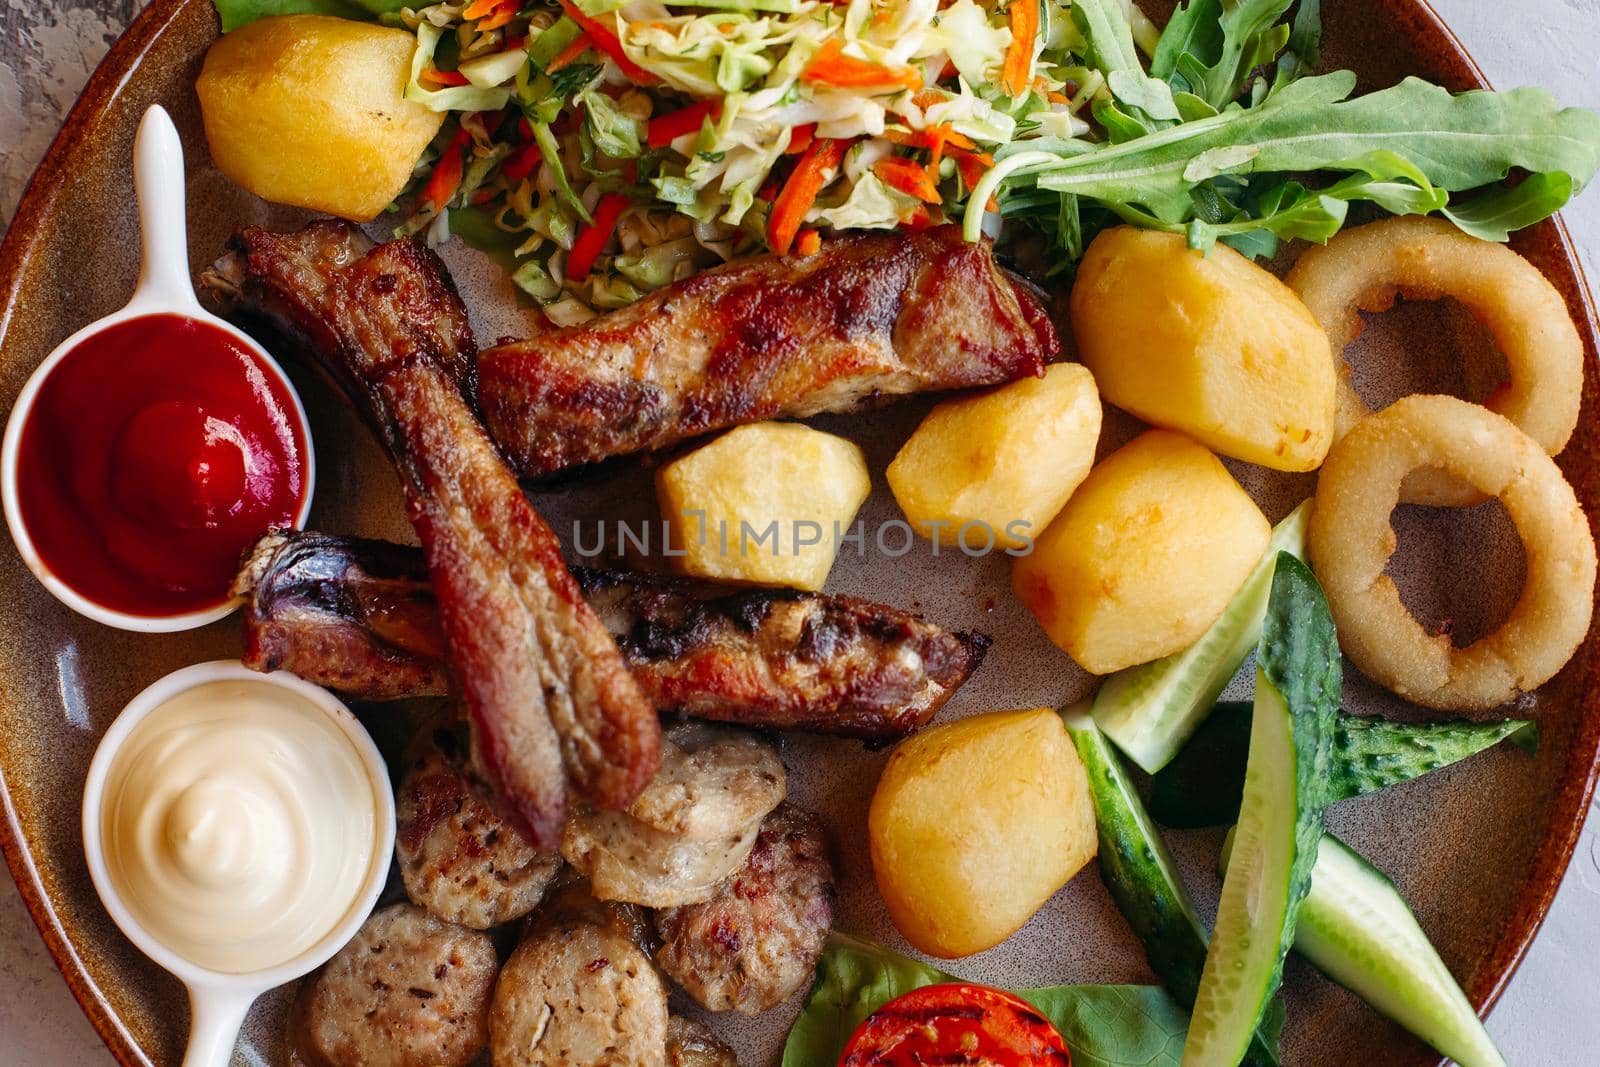 Horizontal photo of tasty food laying on clay plate. Delicious set of vegetable salad, boiled potatoes, grilled chicken legs, roasted onion, sausages, cucmbers, tomatoes and sauces - ketchup and mayo.